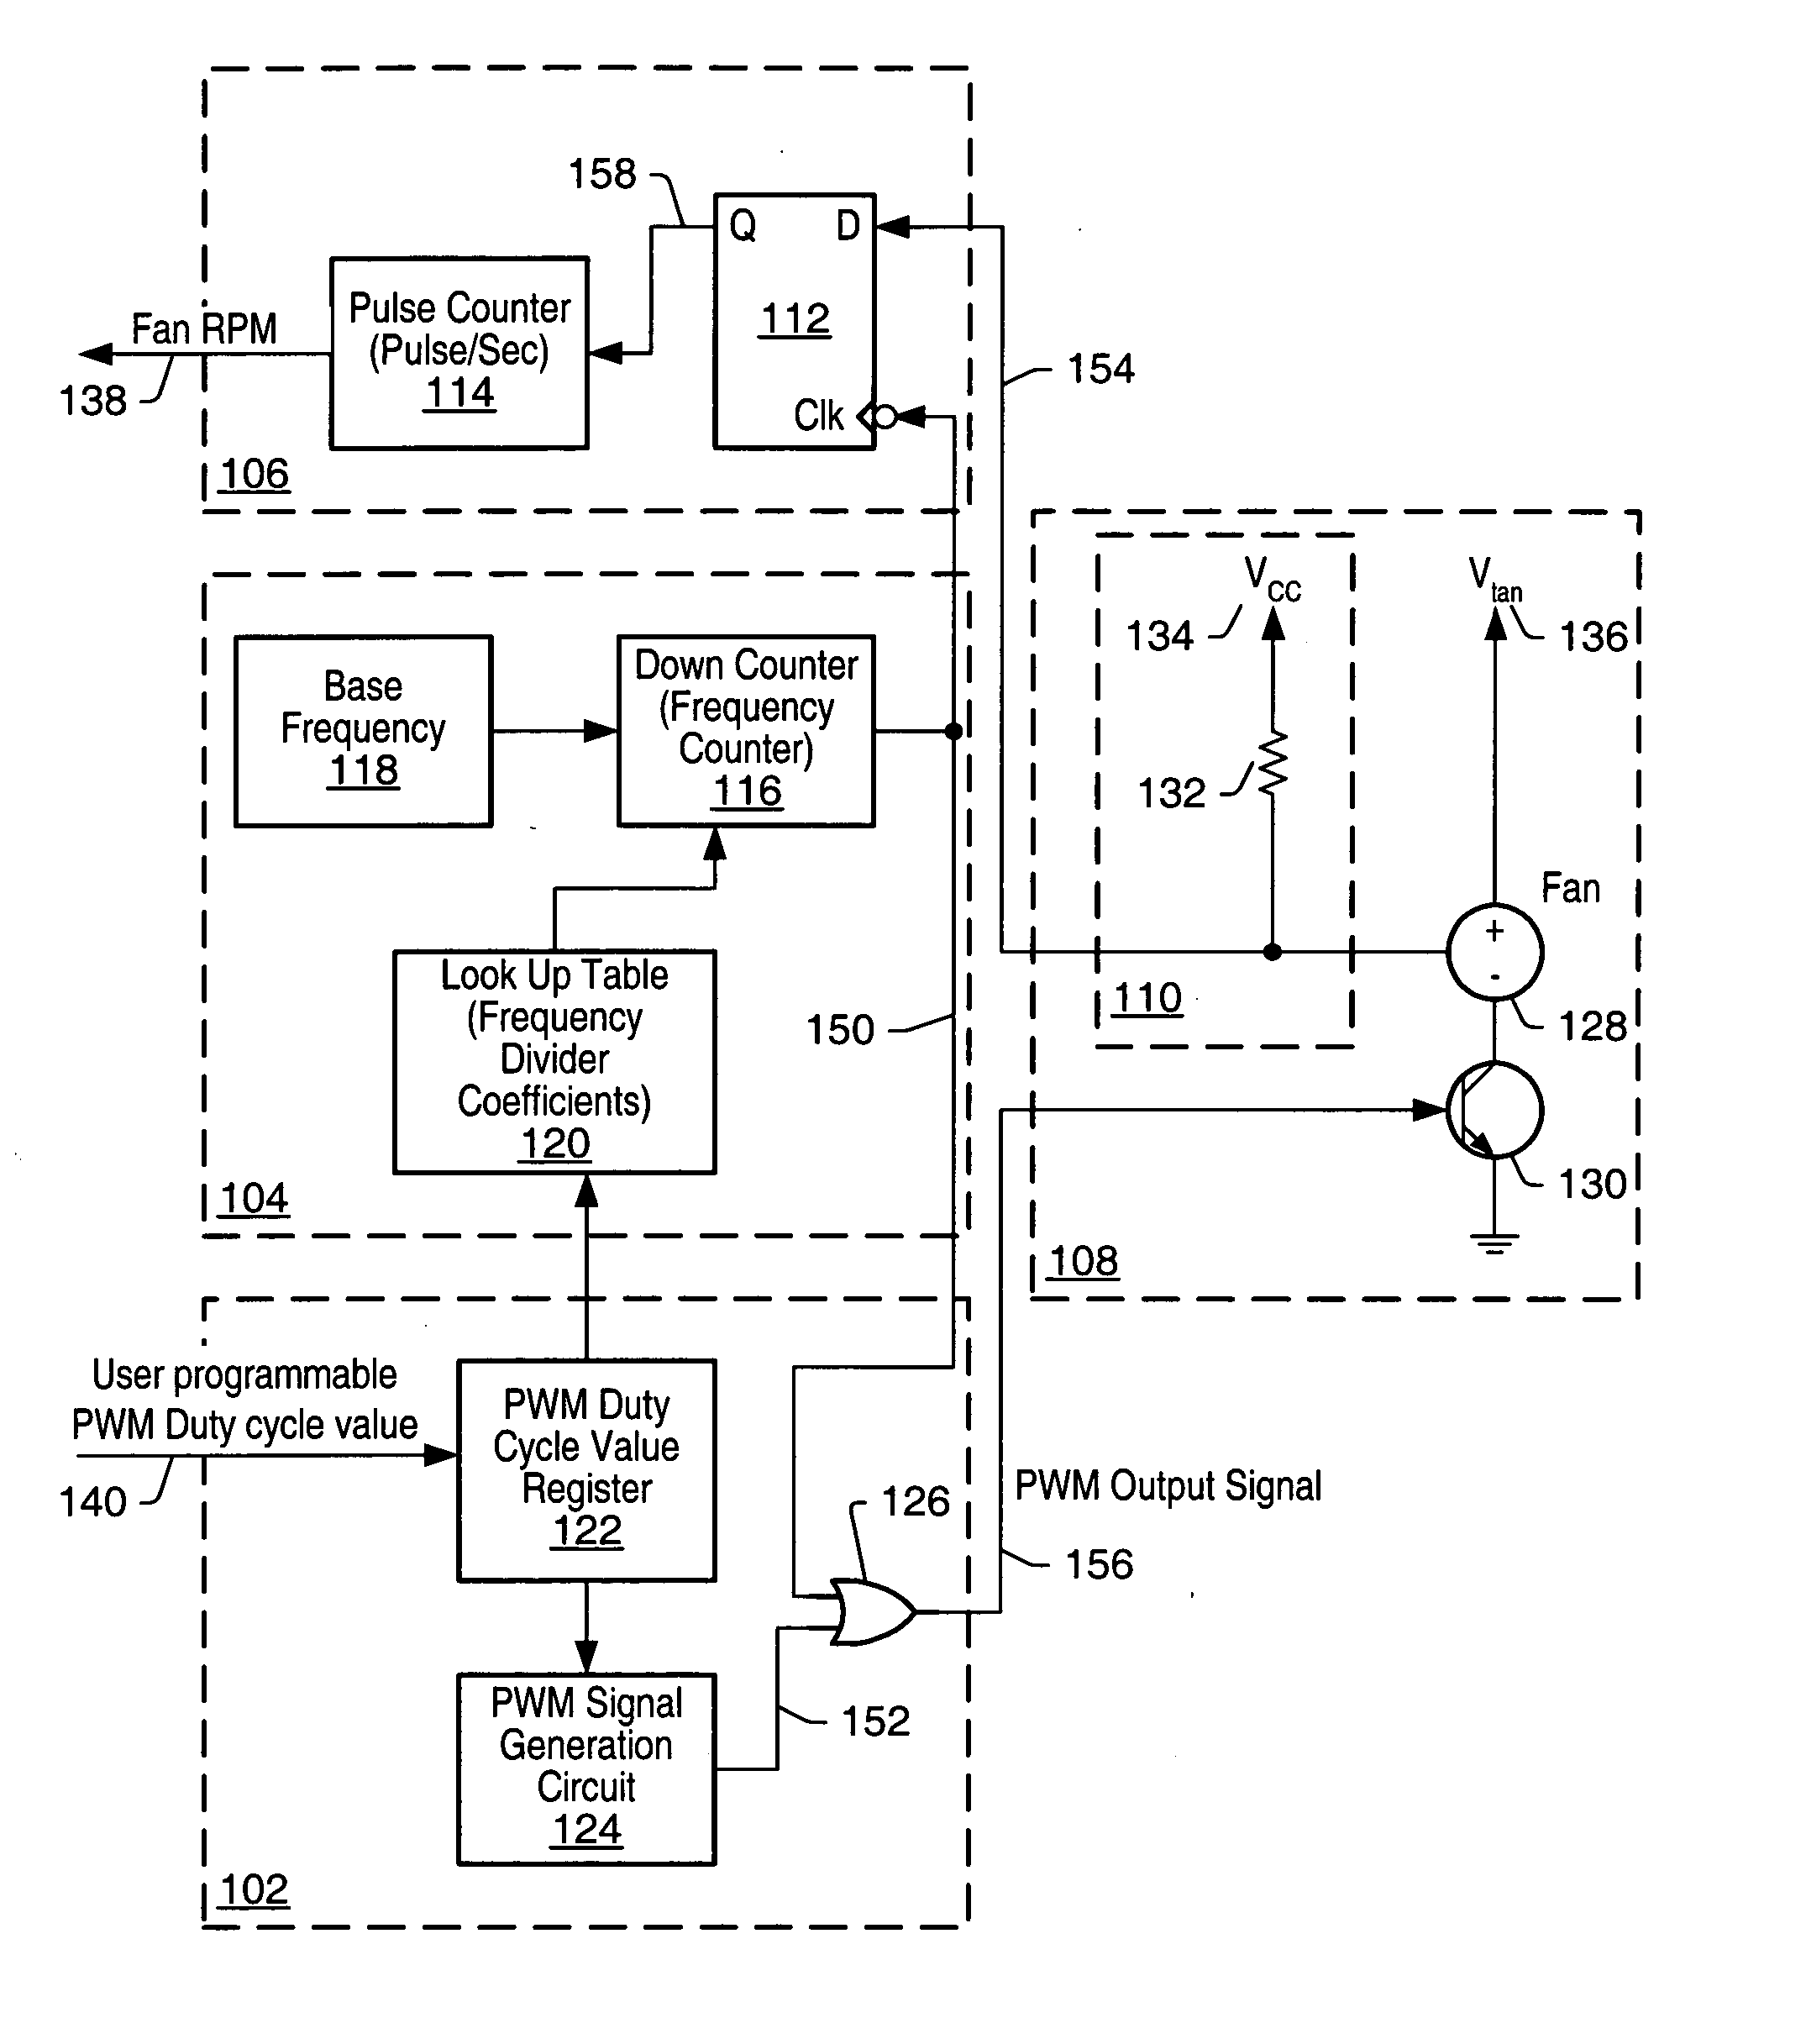 Method and apparatus to achieve accurate fan tachometer readings for fans with different speeds